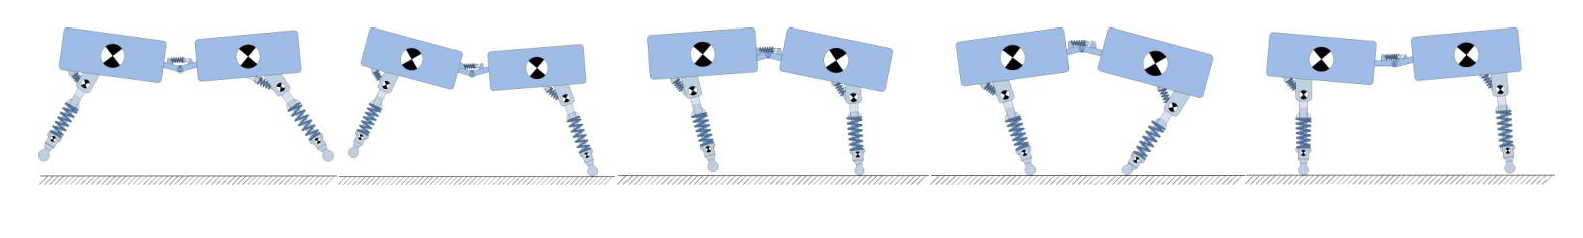 Snapshots of a sample gait pattern (from left to right) of the developed quadruped model with actuated spine DOF.